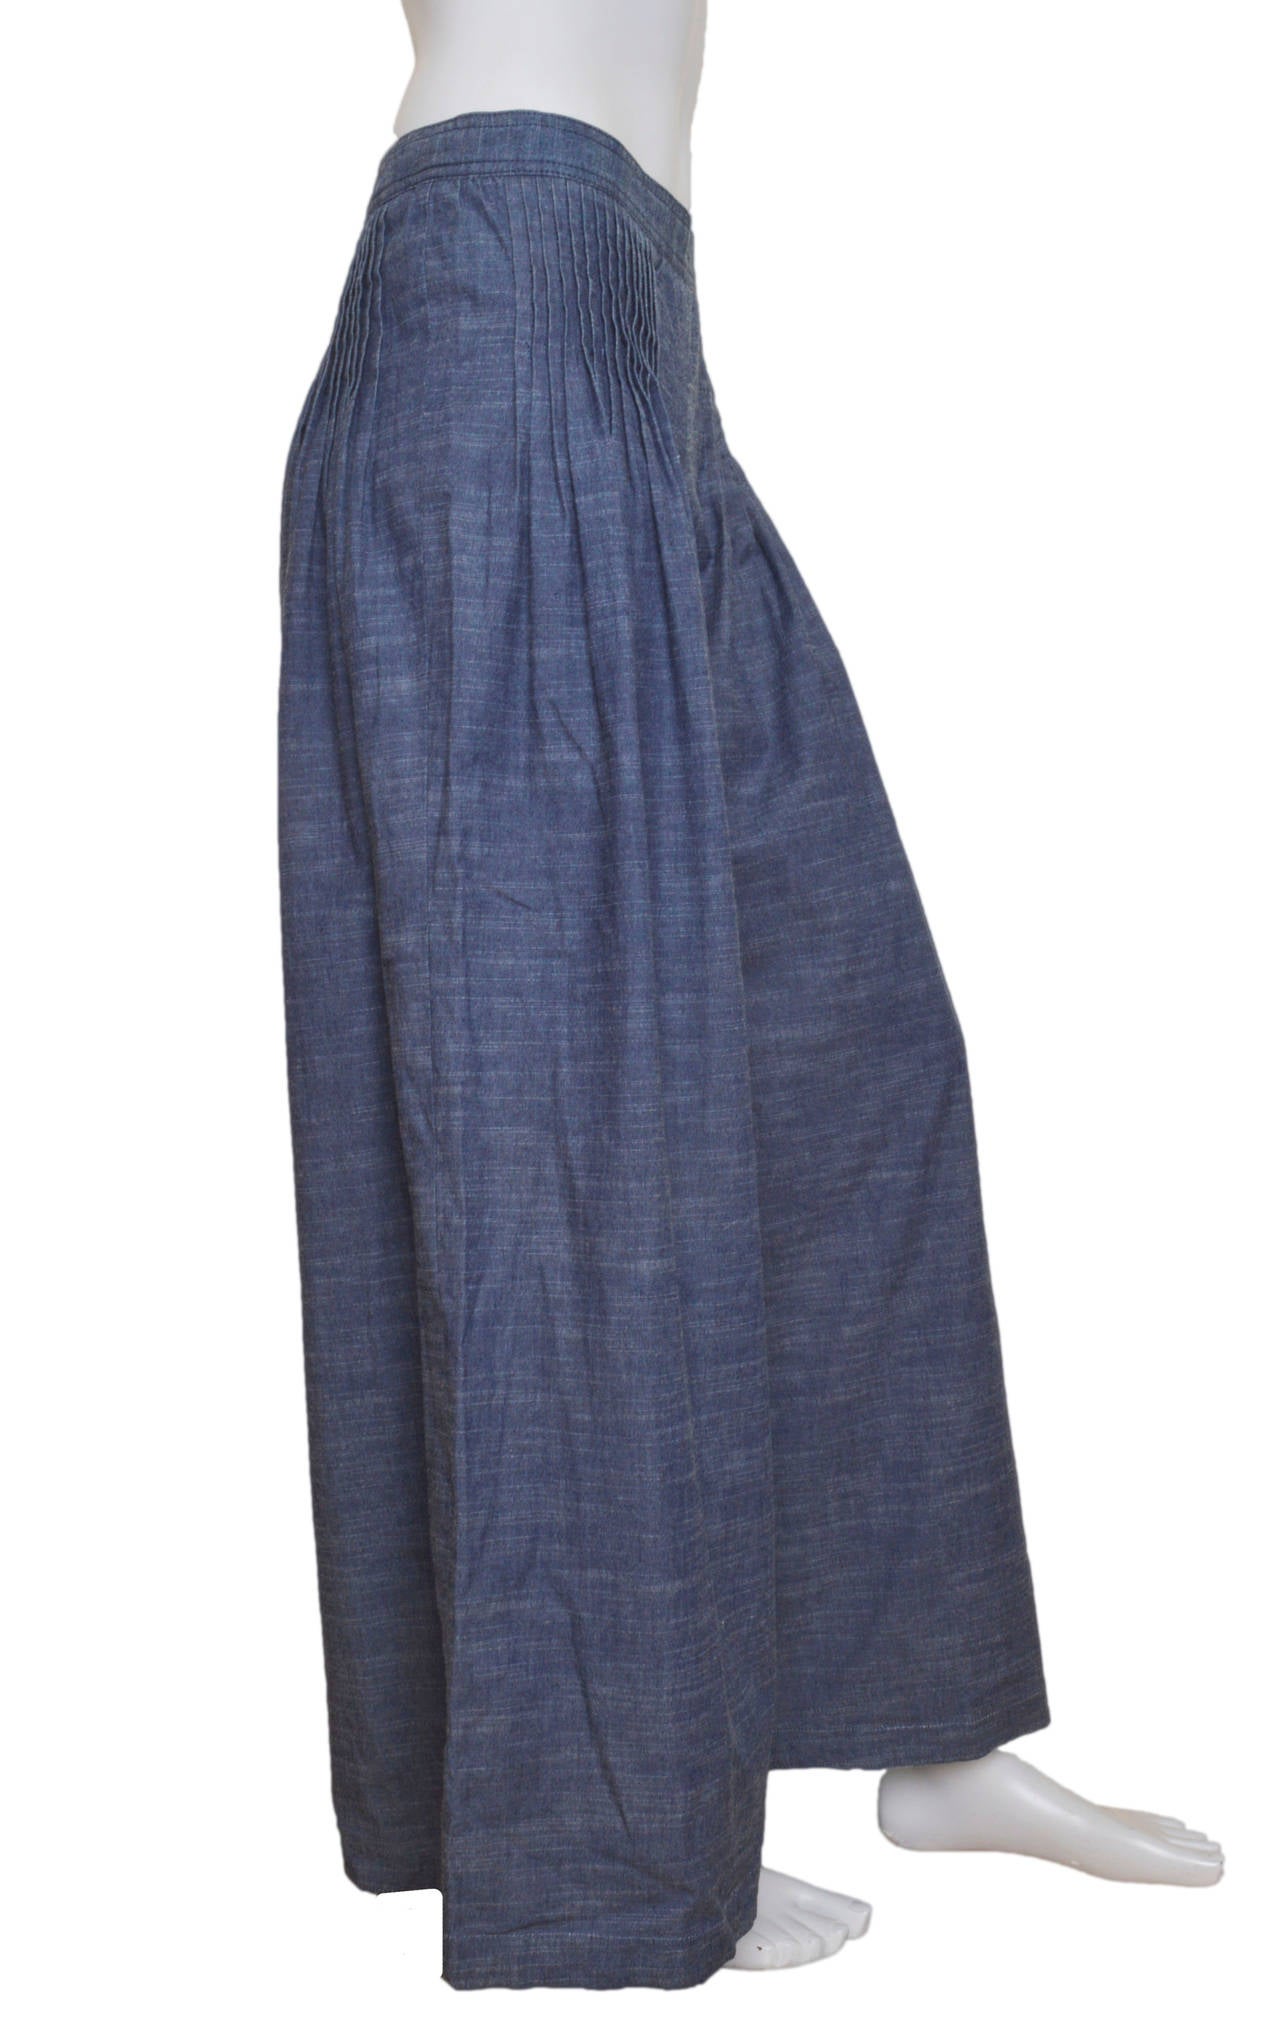 Chanel lightweight denim wide leg (palazzo) pants.
Flat front with pintuck pleats that loosen at hip.
Side closure zipper and logo Cc button.